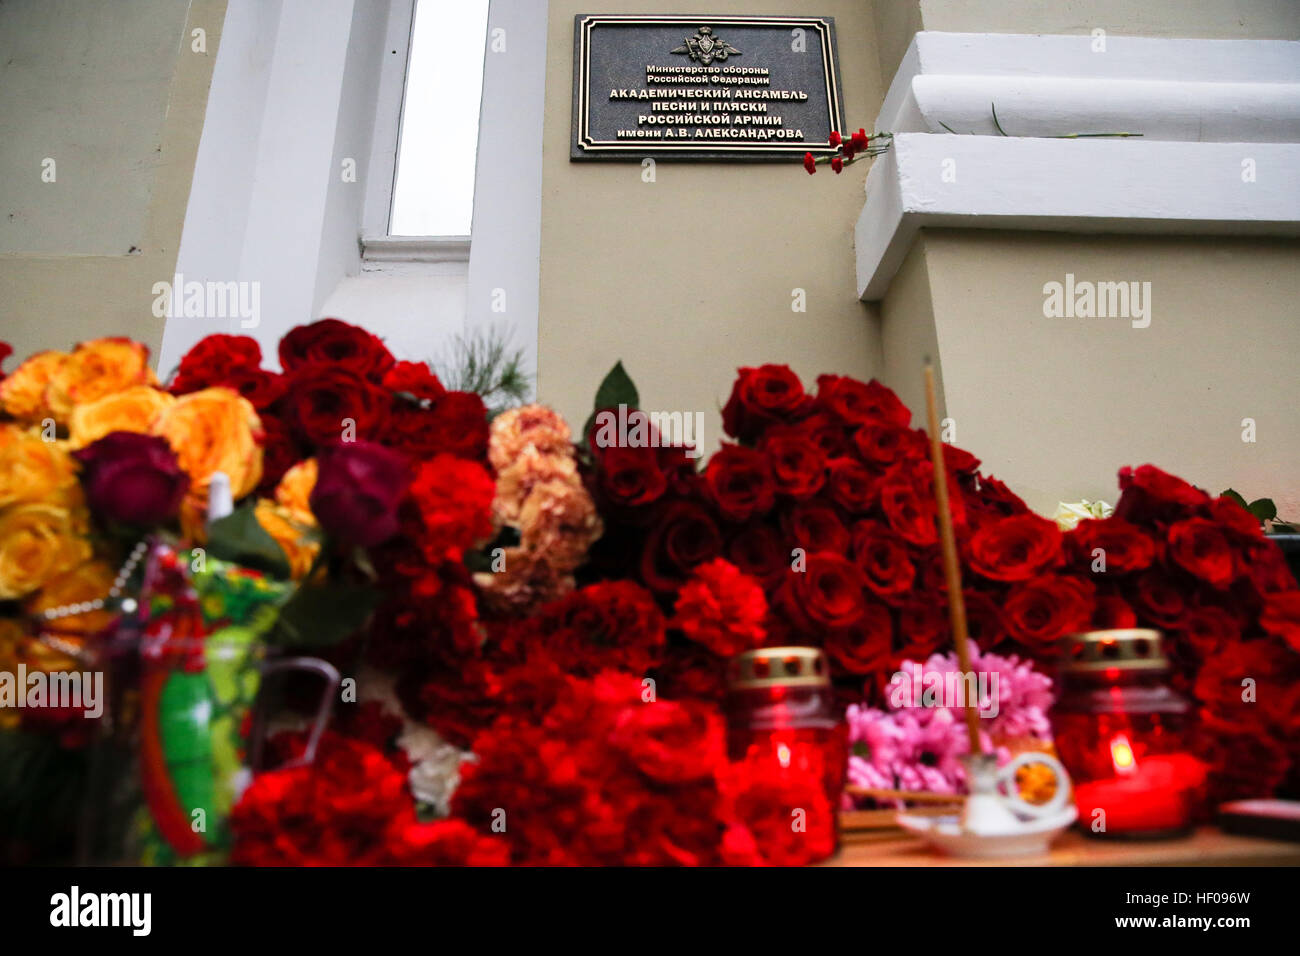 Moscow, Russia. 25th December, 2016. Flowers at the Alexandrov Hall, a rehearsal room of the Alexandrov Ensemble, in memory of the victims of a Russian Defense Ministry plane crash. A Tupolev Tu-154 plane of the Russian Defense Ministry with 92 people on board crashed into the Black Sea near the city of Sochi on December 25, 2016. The plane was carrying members of the Alexandrov Ensemble, Russian servicemen and journalists to Russia's Hmeymim air base in Syria. Fragments of the plane were found about 1.5km from Sochi coastline. © Victor Vytolskiy/Alamy Live News Stock Photo